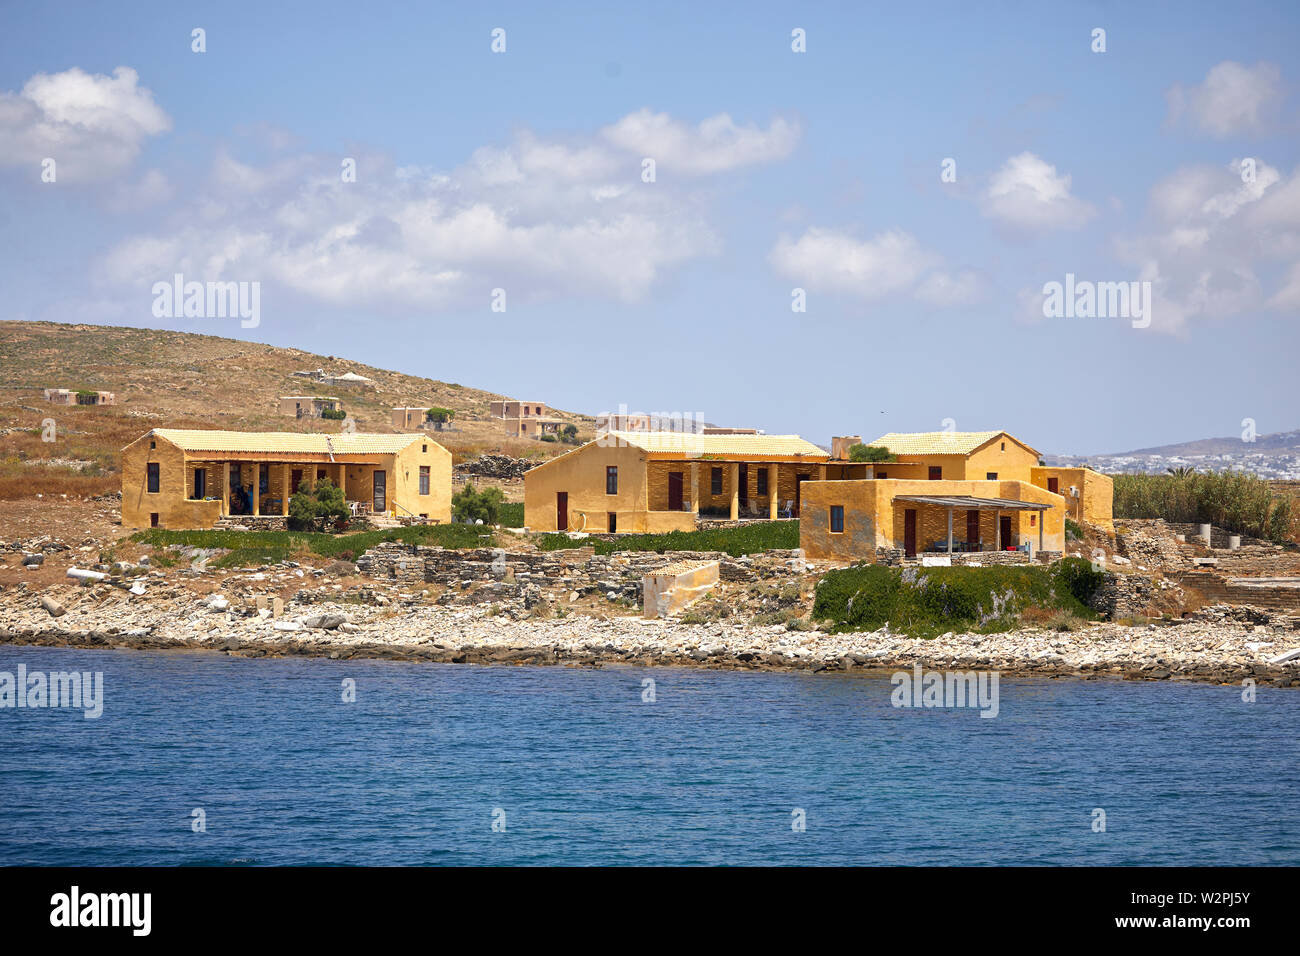 Delos historical, and archaeological ruins Mykonos, ˈmikonos Greek island, part of the Cyclades, Greece, Delos historical, yellow archaeologists house Stock Photo